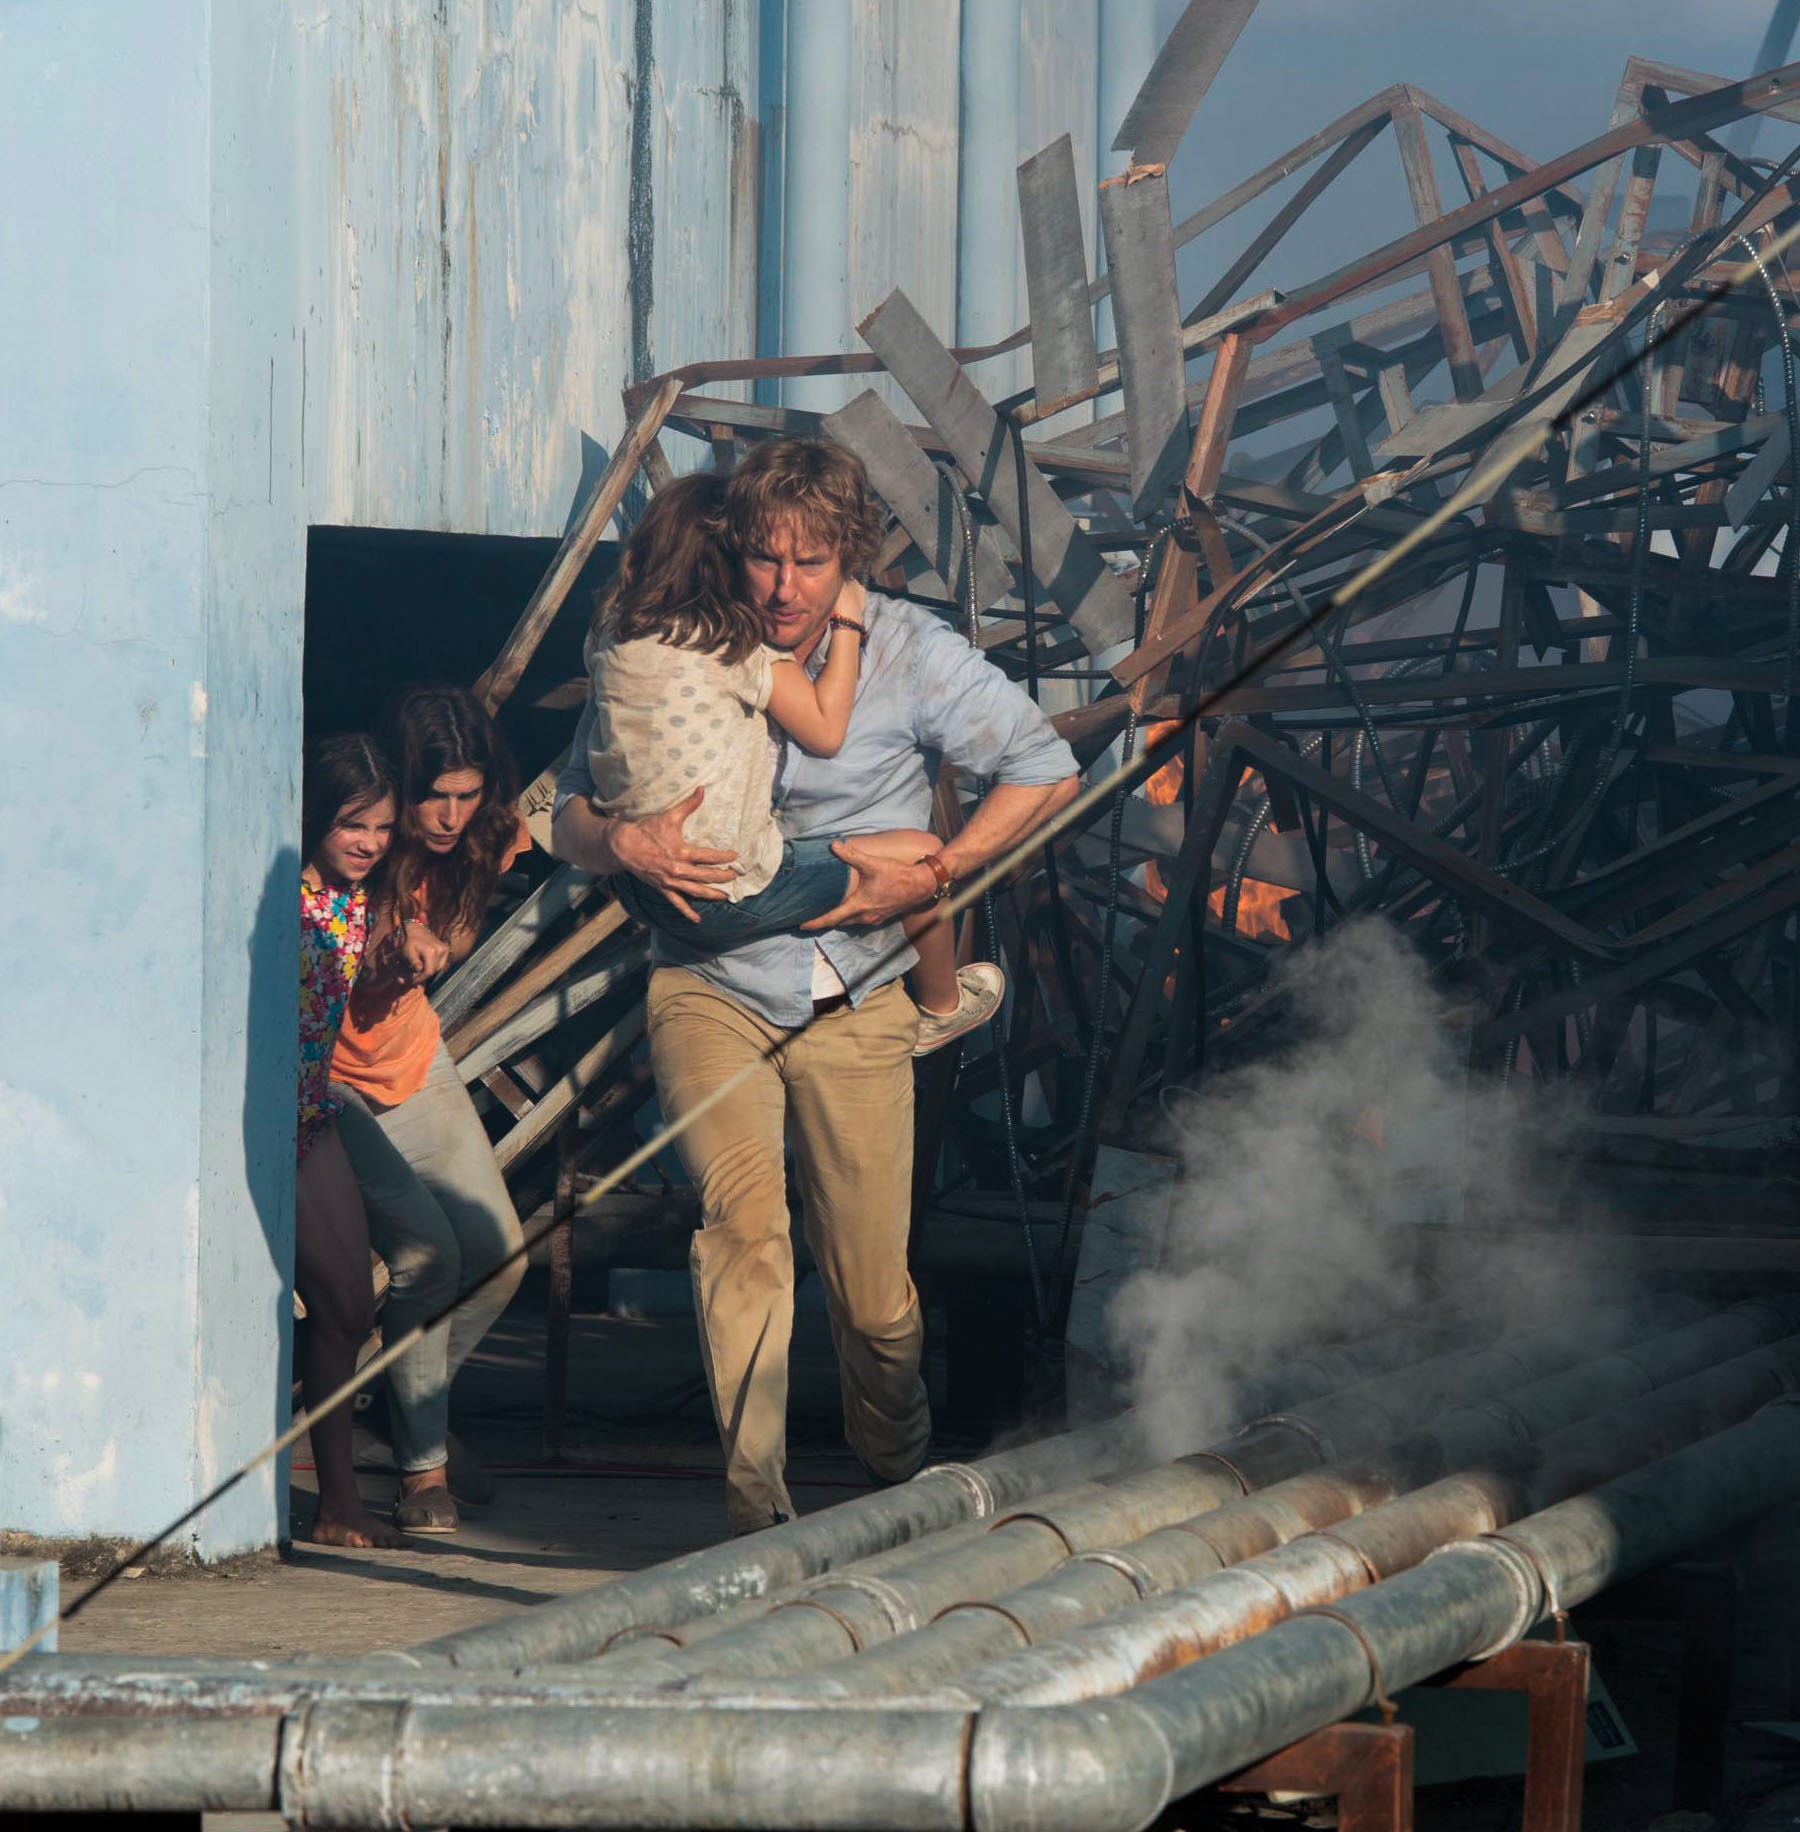 Sterling Jerins, Lake Bell and Owen Wilson in The Weinstein Company's No Escape (2015)